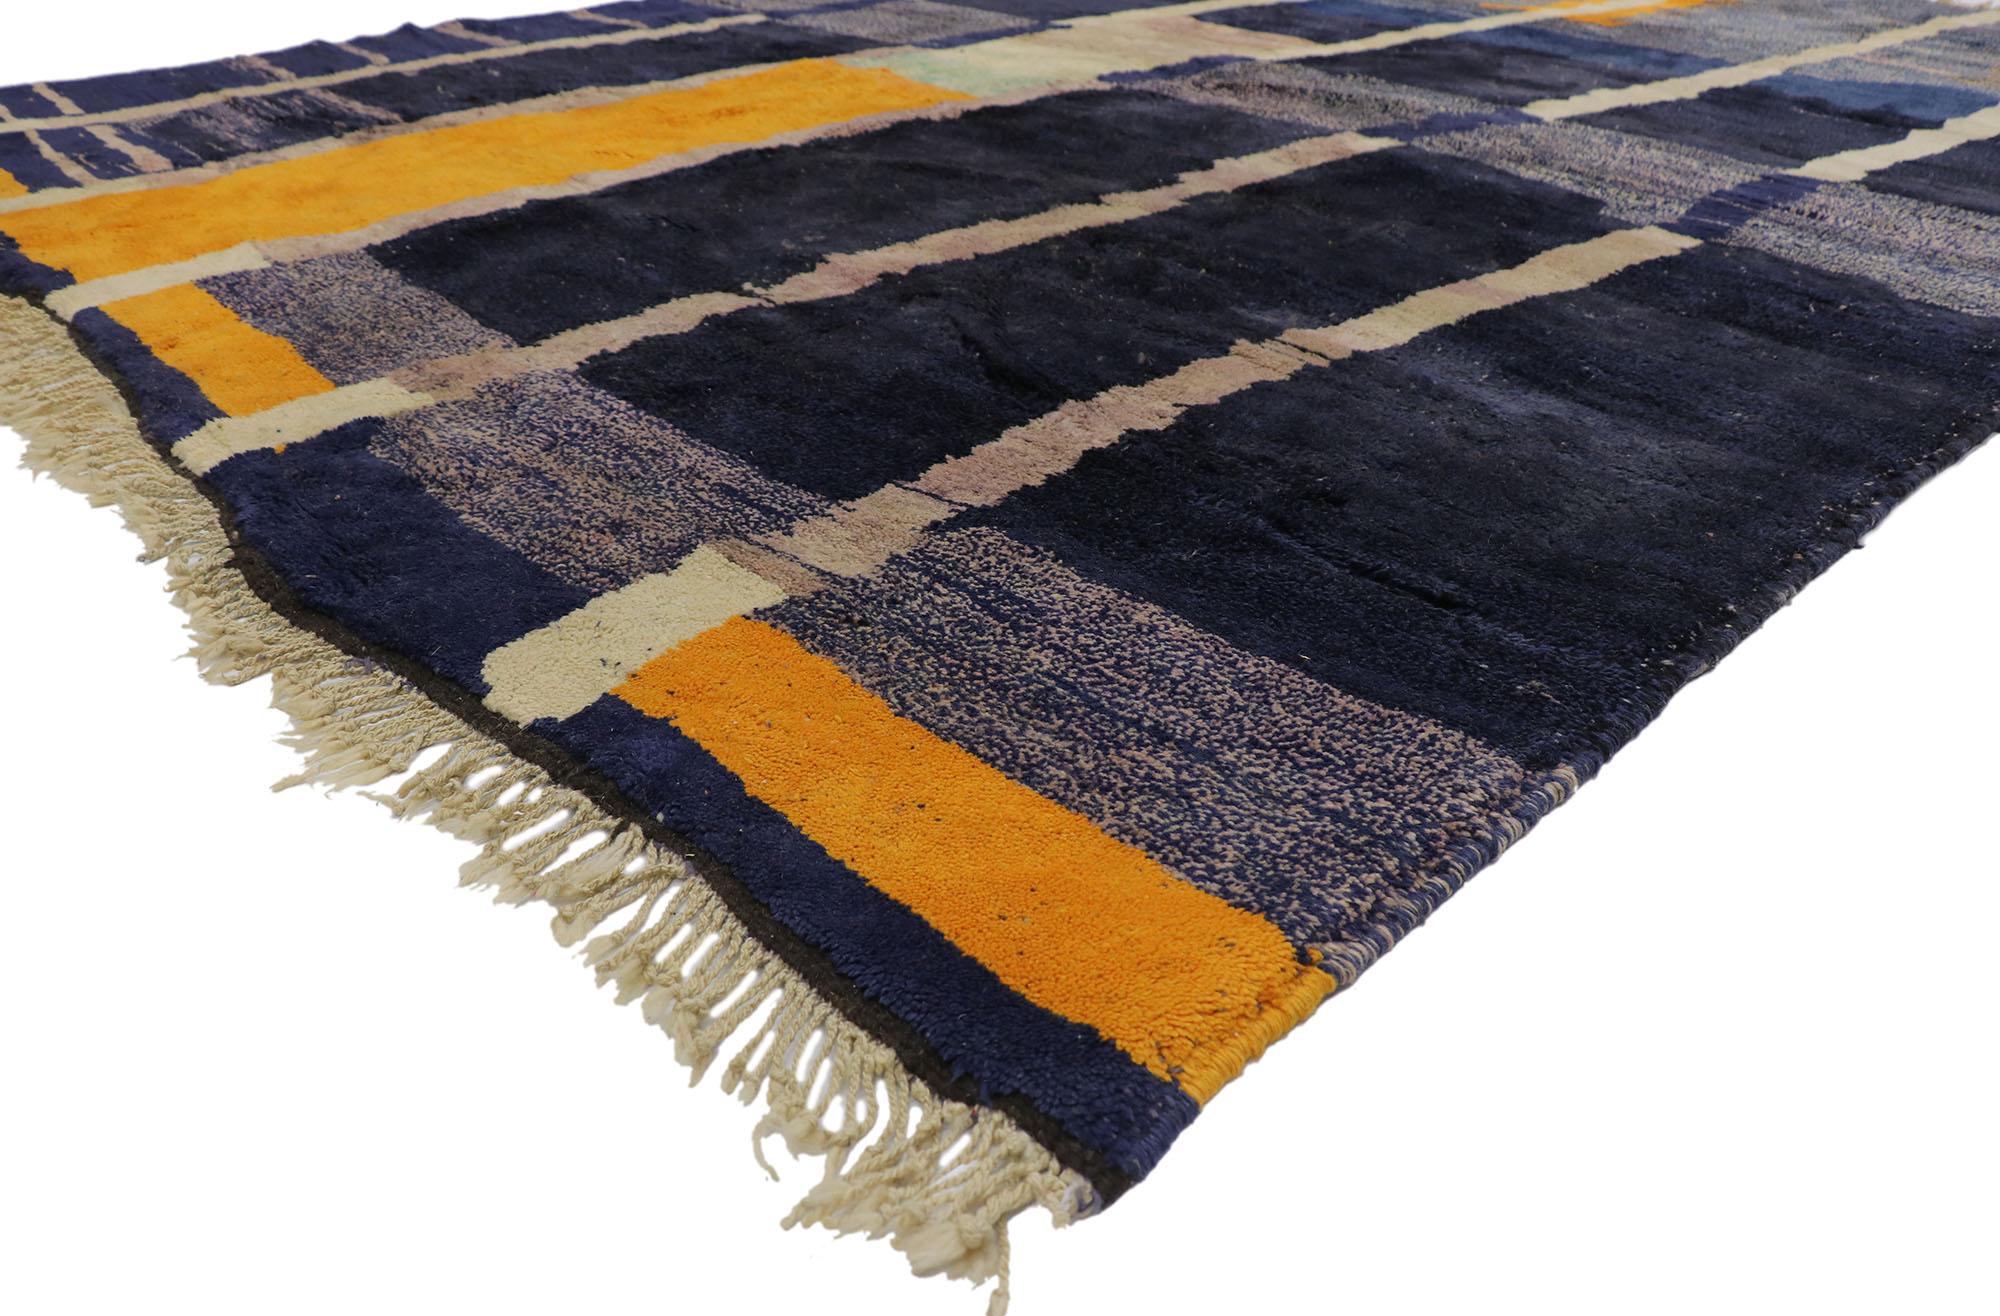 21641, new contemporary Berber Moroccan rug Inspired by Gunta Stölzl. Showcasing a bold expressive design, incredible detail and texture, this hand knotted wool contemporary Berber Moroccan rug is a captivating vision of woven beauty. The bold